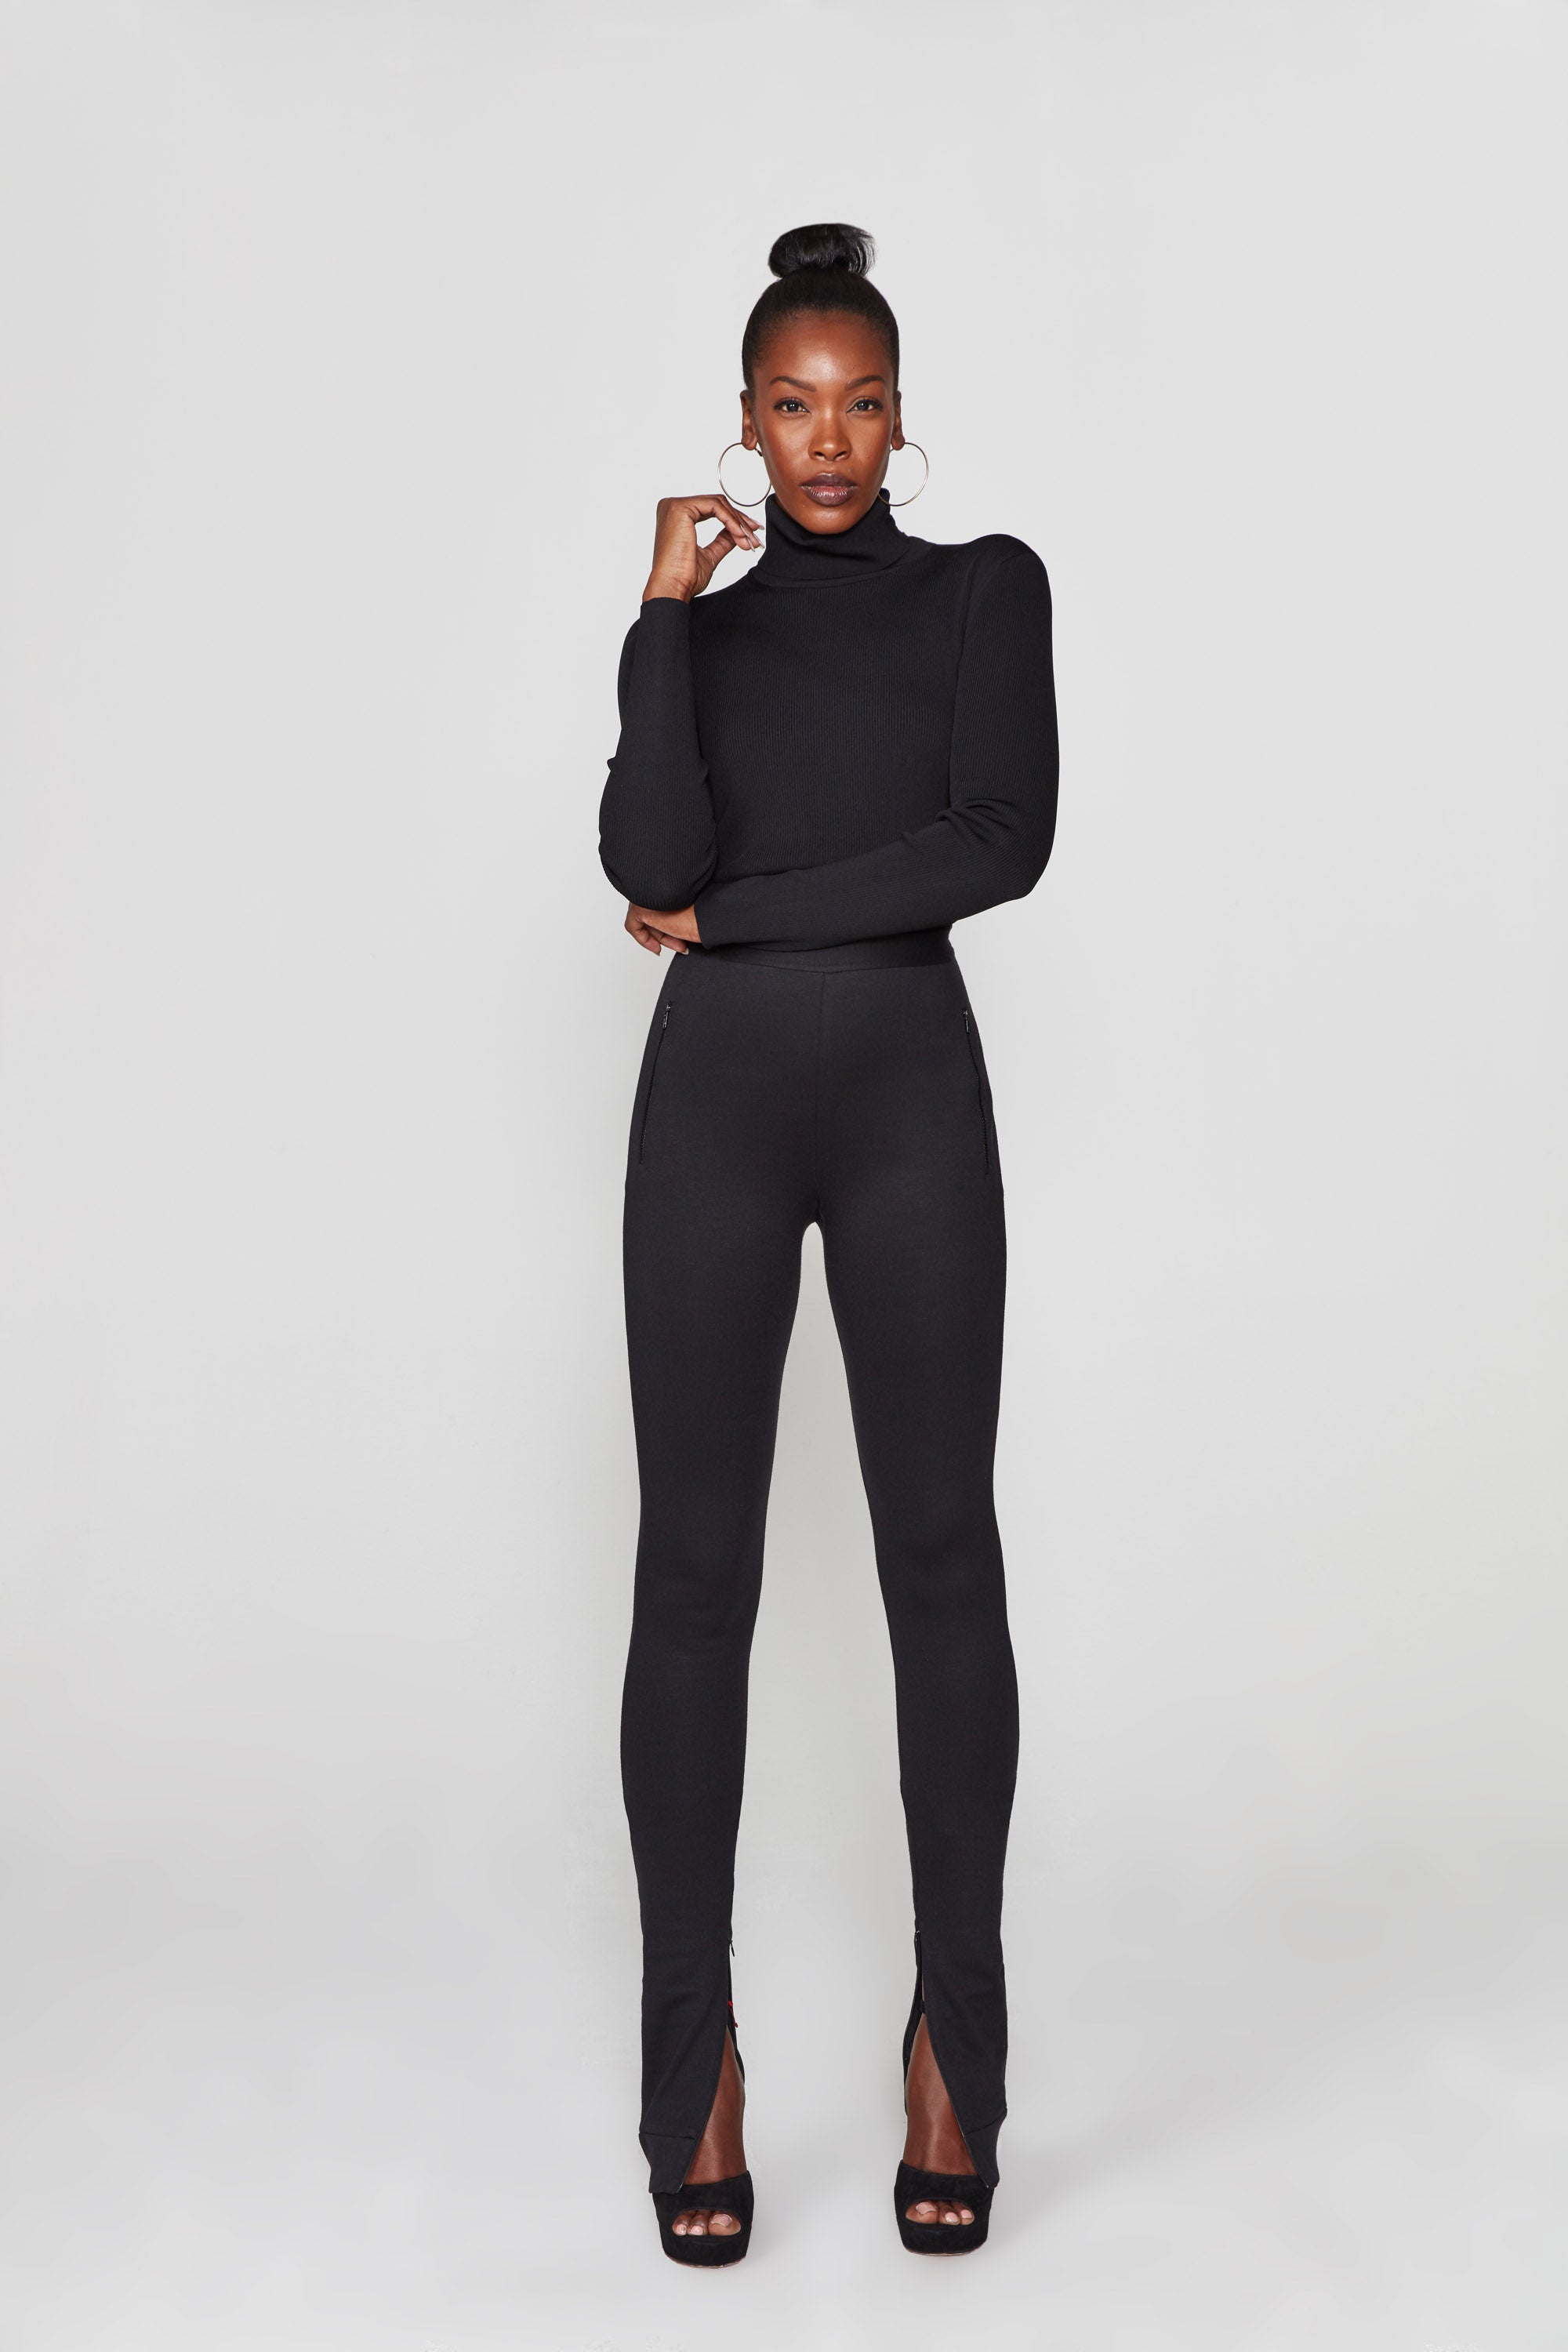 The Sixes Chanel Pant - Dusk Tall